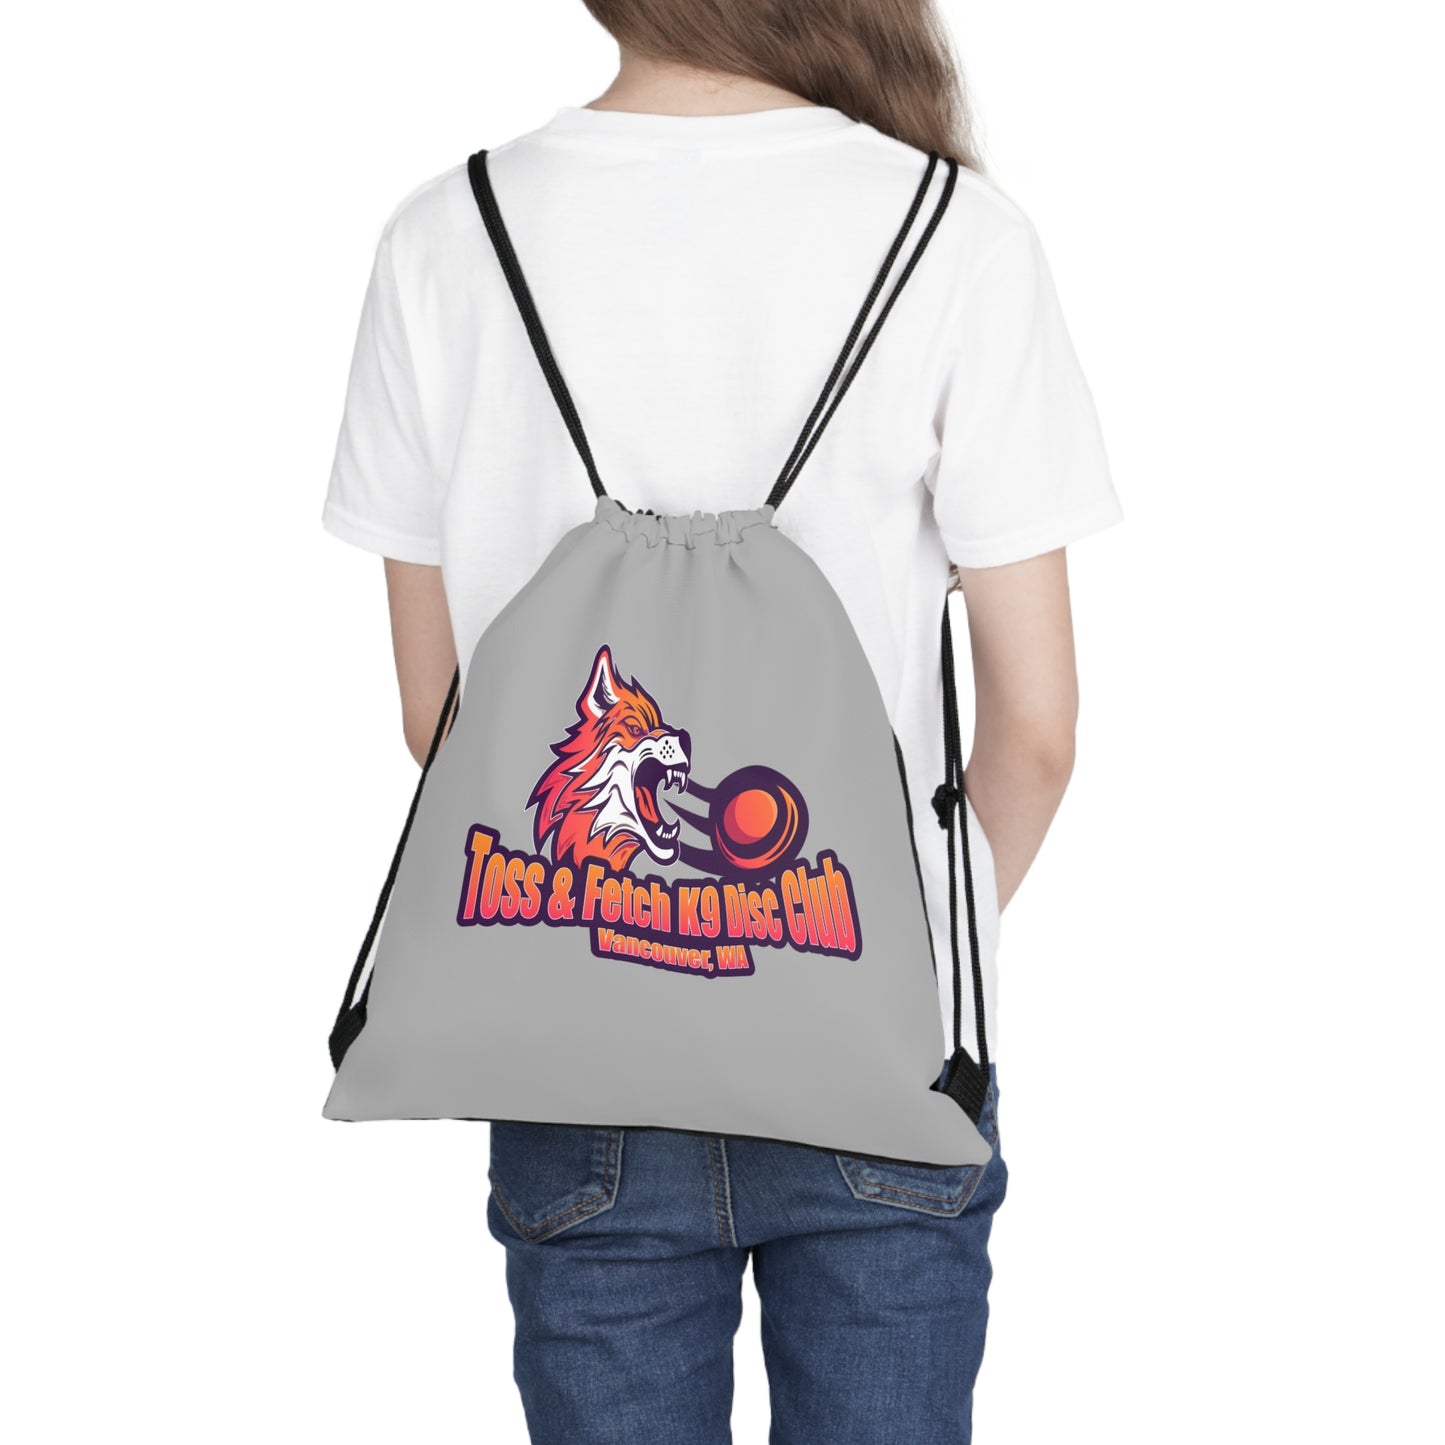 Toss & Fetch - Vancouver, WA Outdoor Drawstring Bag